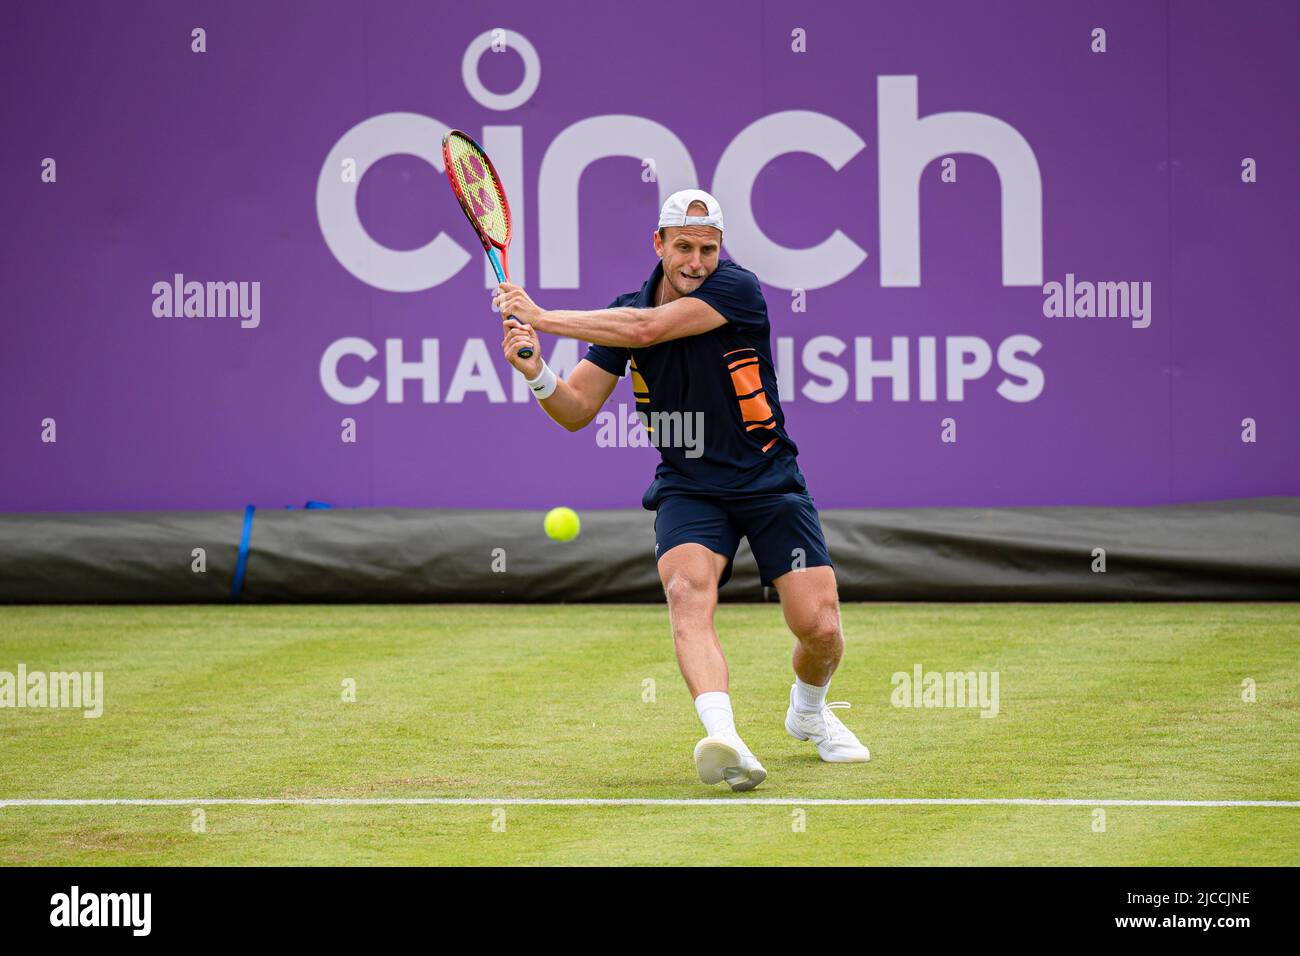 LONDON, UNITED KINGDOM. Jun 12, 2022. Denis Kudla (USA) vs Quentin Halys (FRA) during the qualifying match on Day Two of the 2022 Cinch Championships at The Queen's Club on Sunday, June 12, 2022 in LONDON ENGLAND. Credit: Taka G Wu/Alamy Live News Stock Photo